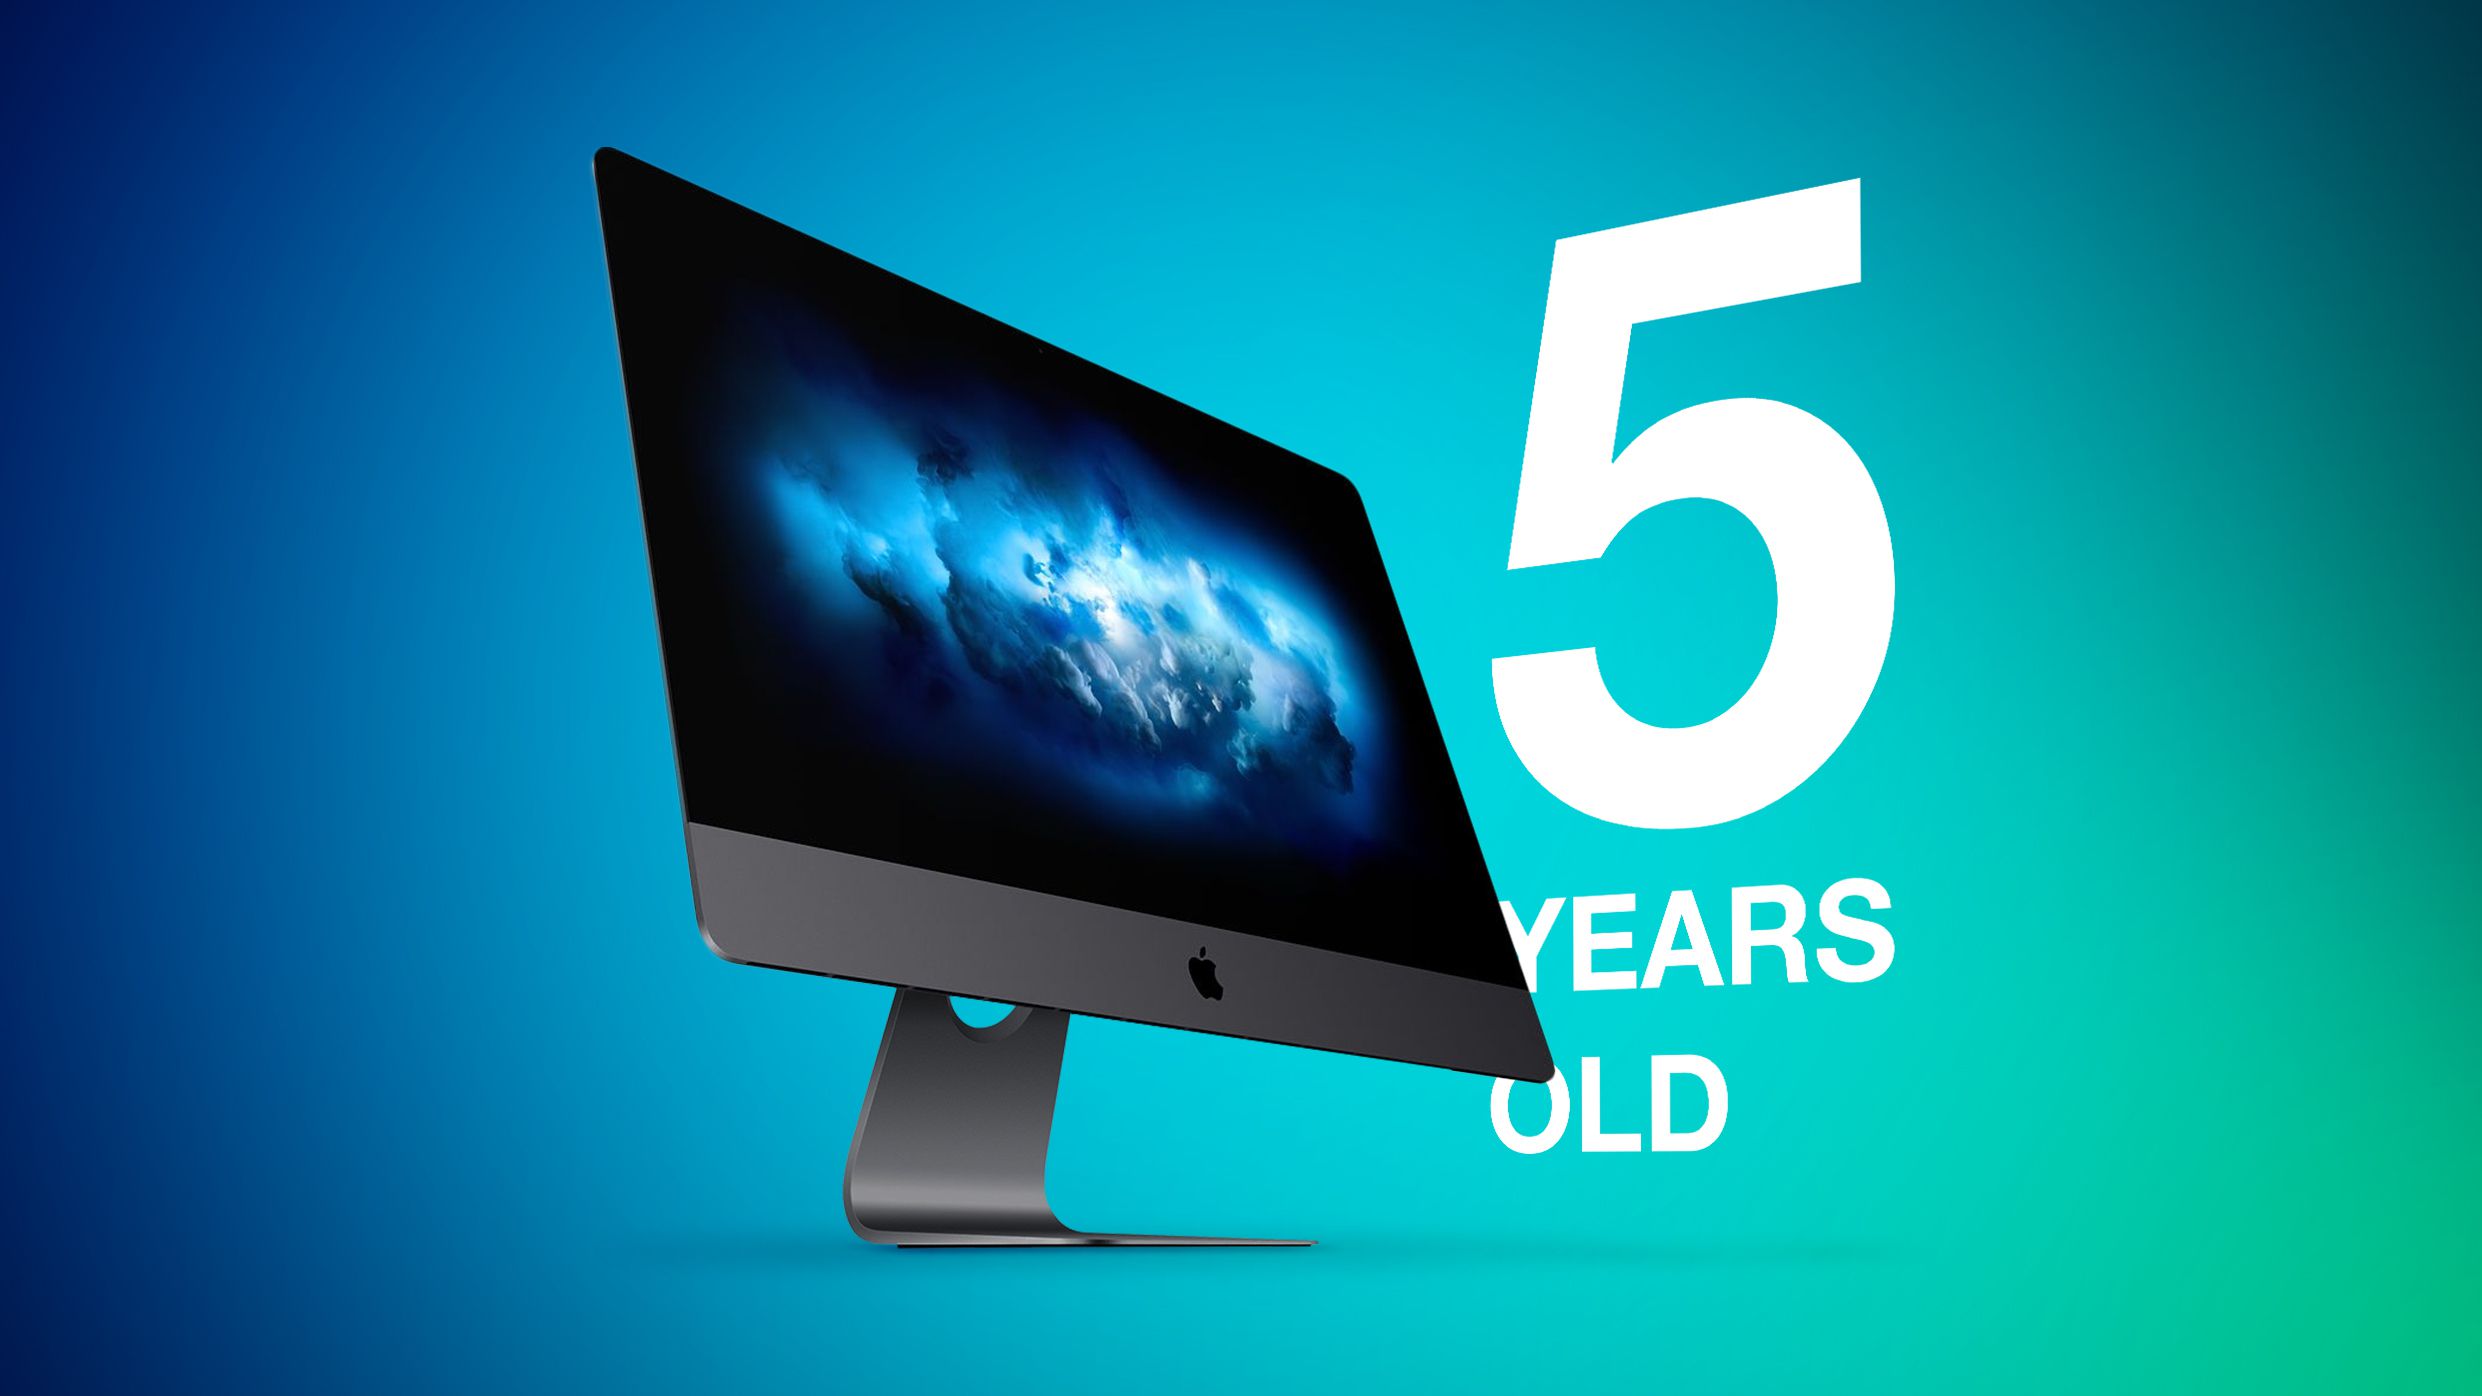 iMac Pro Launched Five Years Ago Today